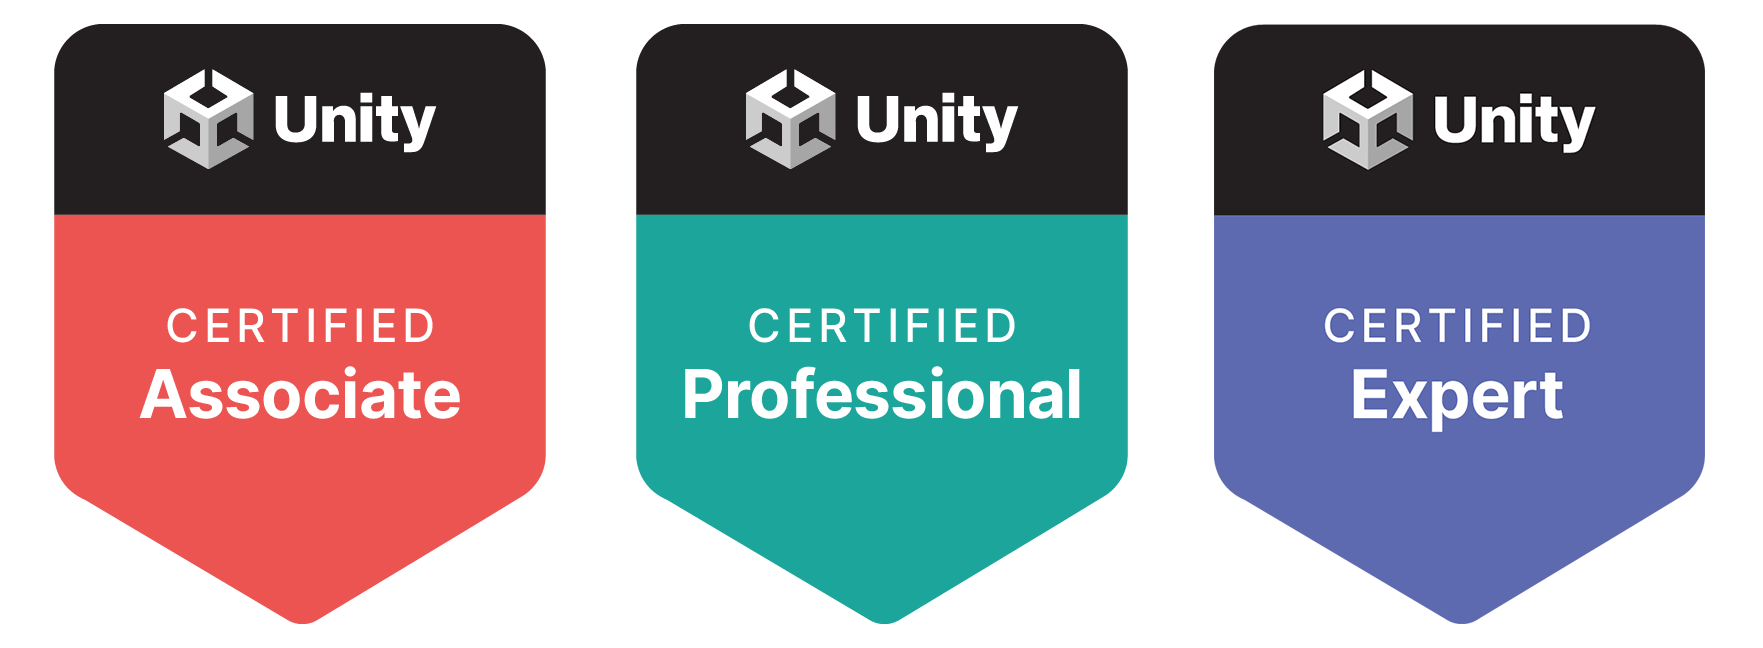 Unity Certified Associate, Unity Certified Professional, Unity Certified Expert